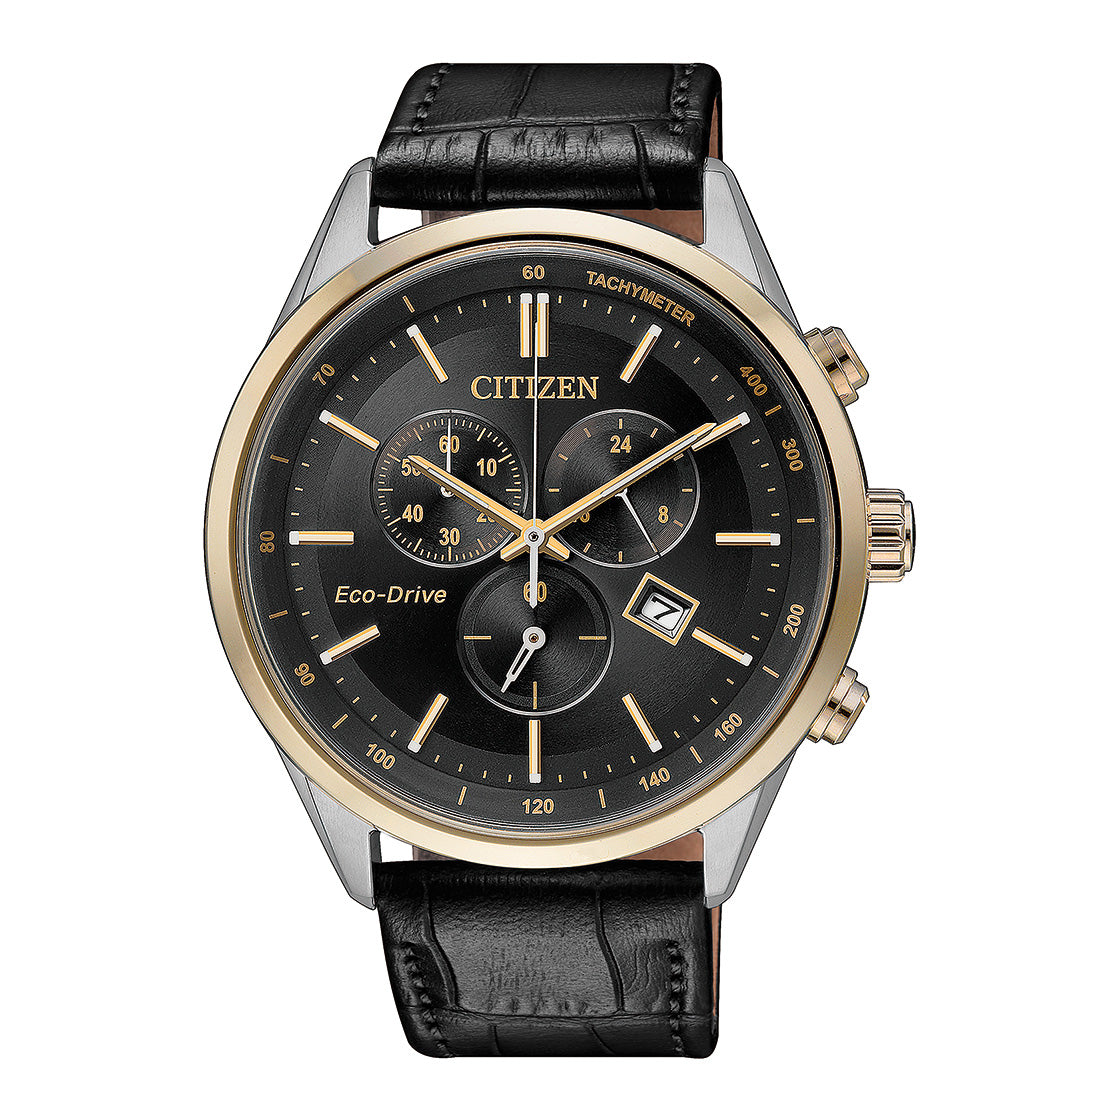 Citizen Men's Watch with Light Powered Movement and Black Dial - AT2144-11E